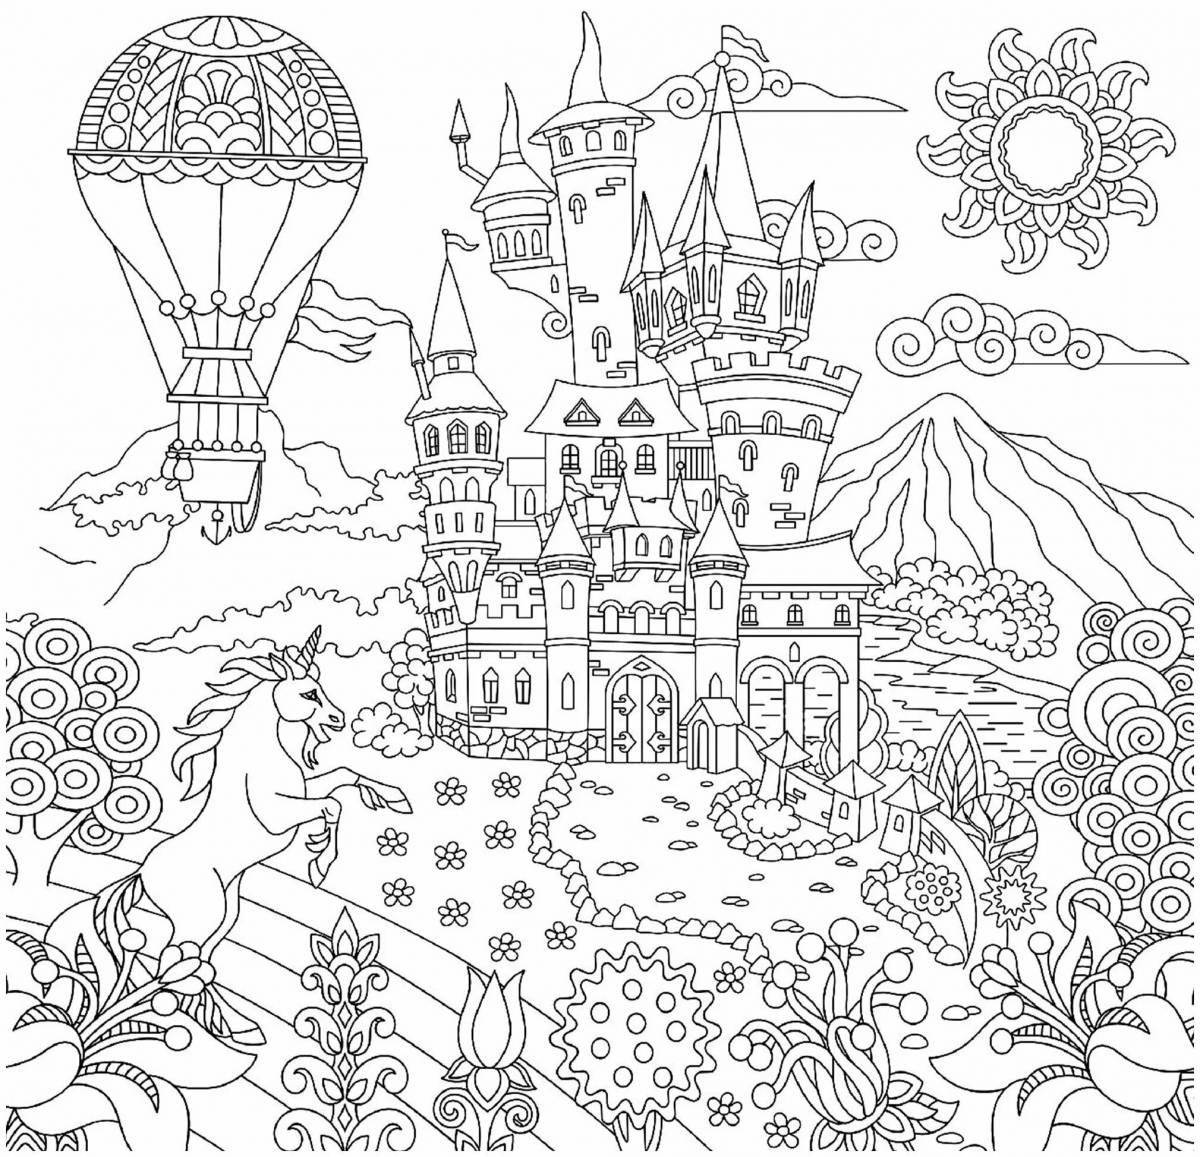 Coloring page inviting magical world